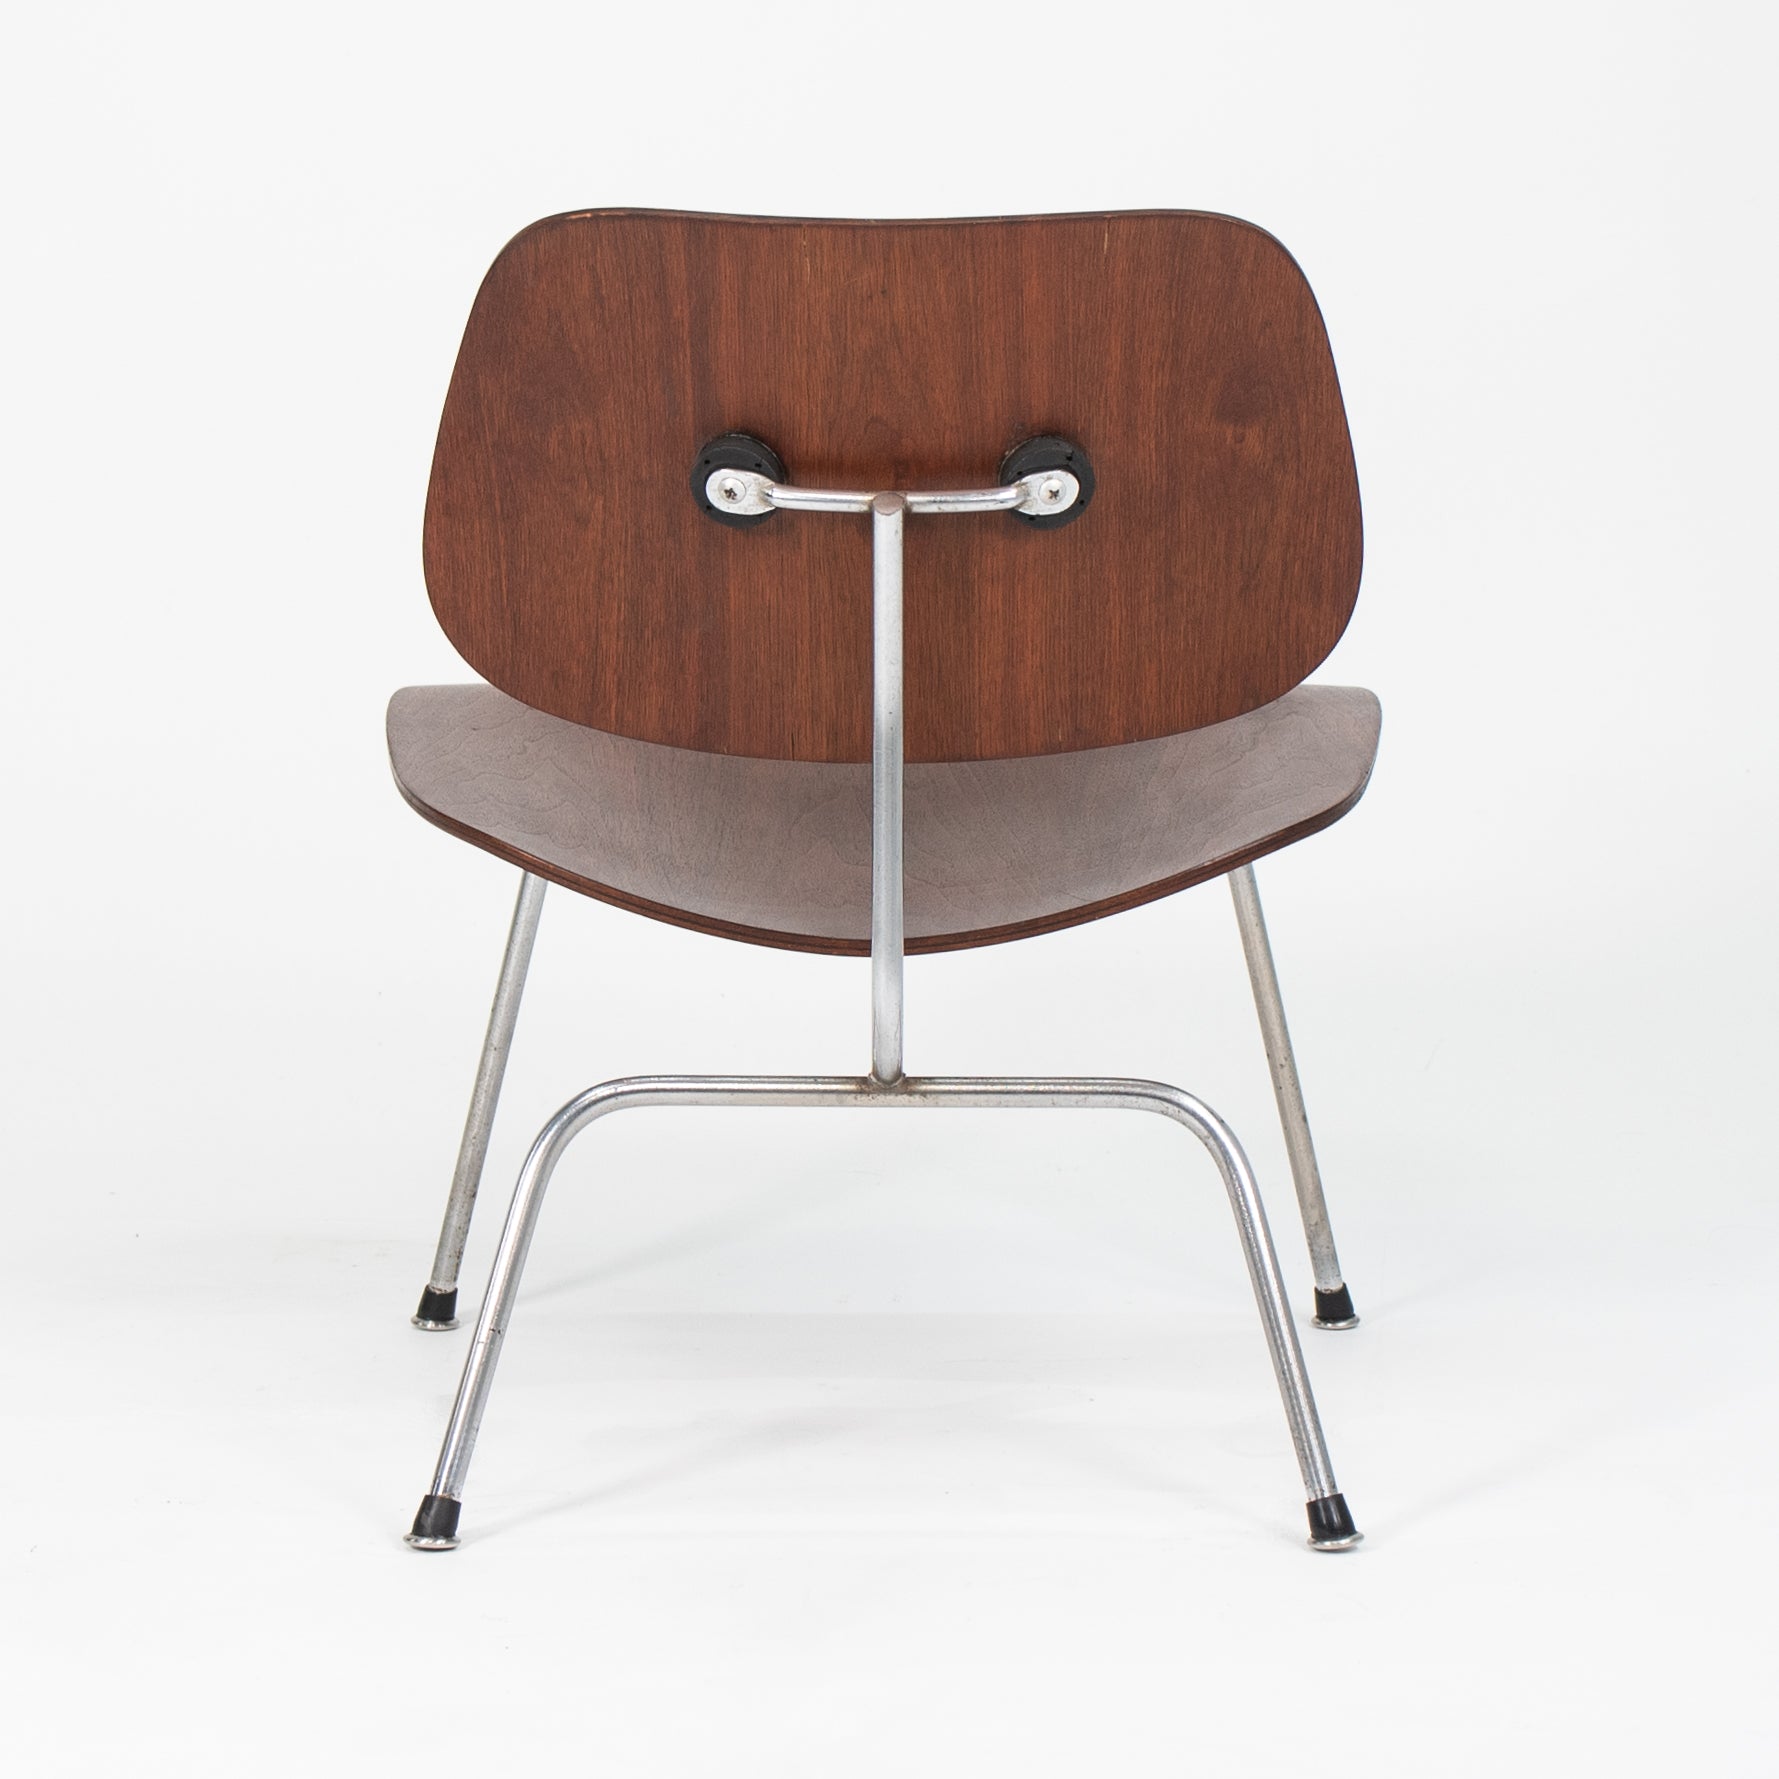 1954 Herman Miller Eames LCM Walnut Lounge Chair with Metal Legs